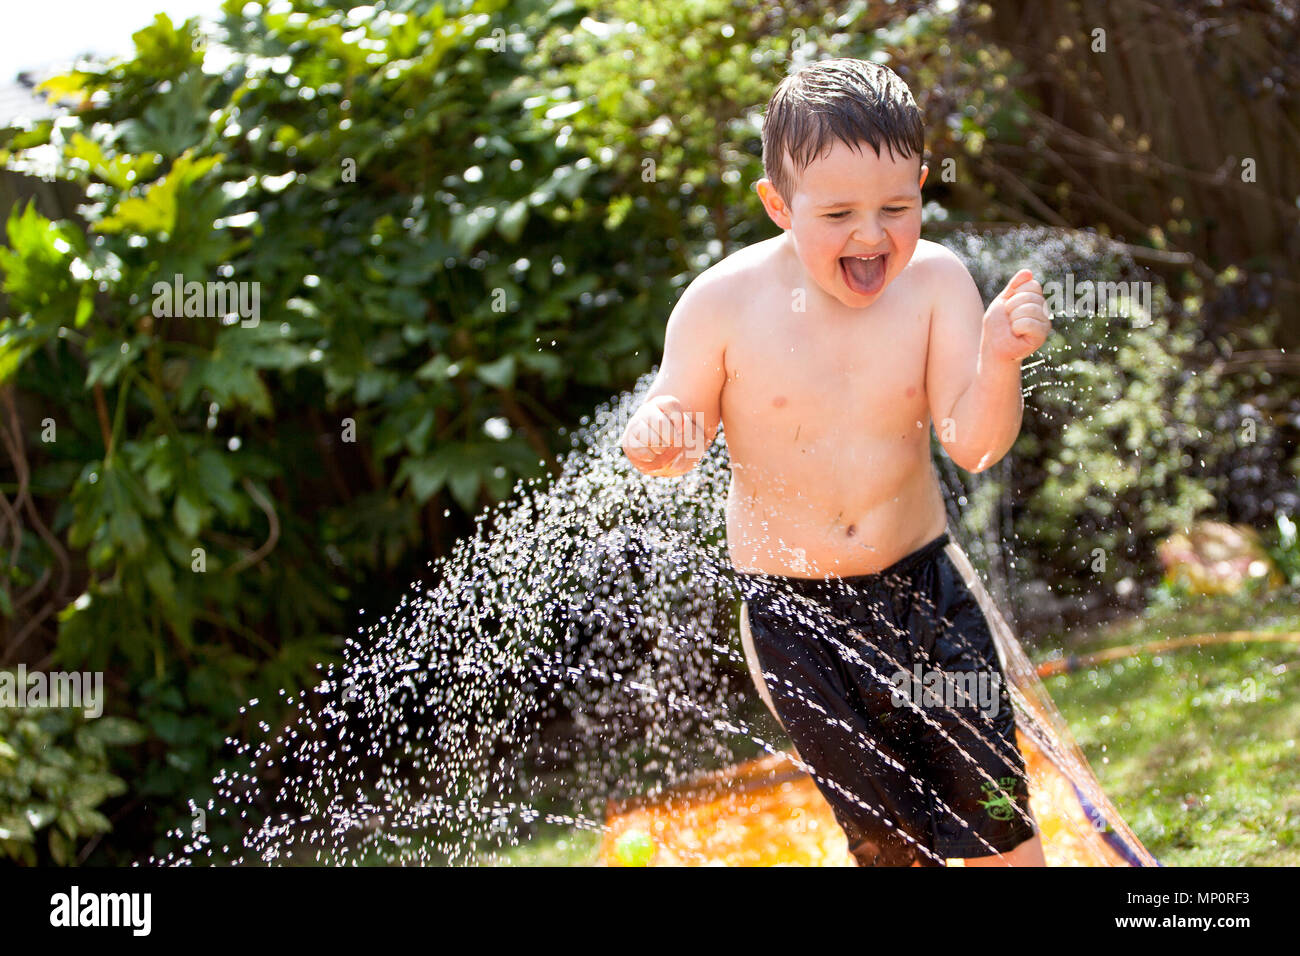 Young boy playing with water sprinklers in back garden Stock Photo